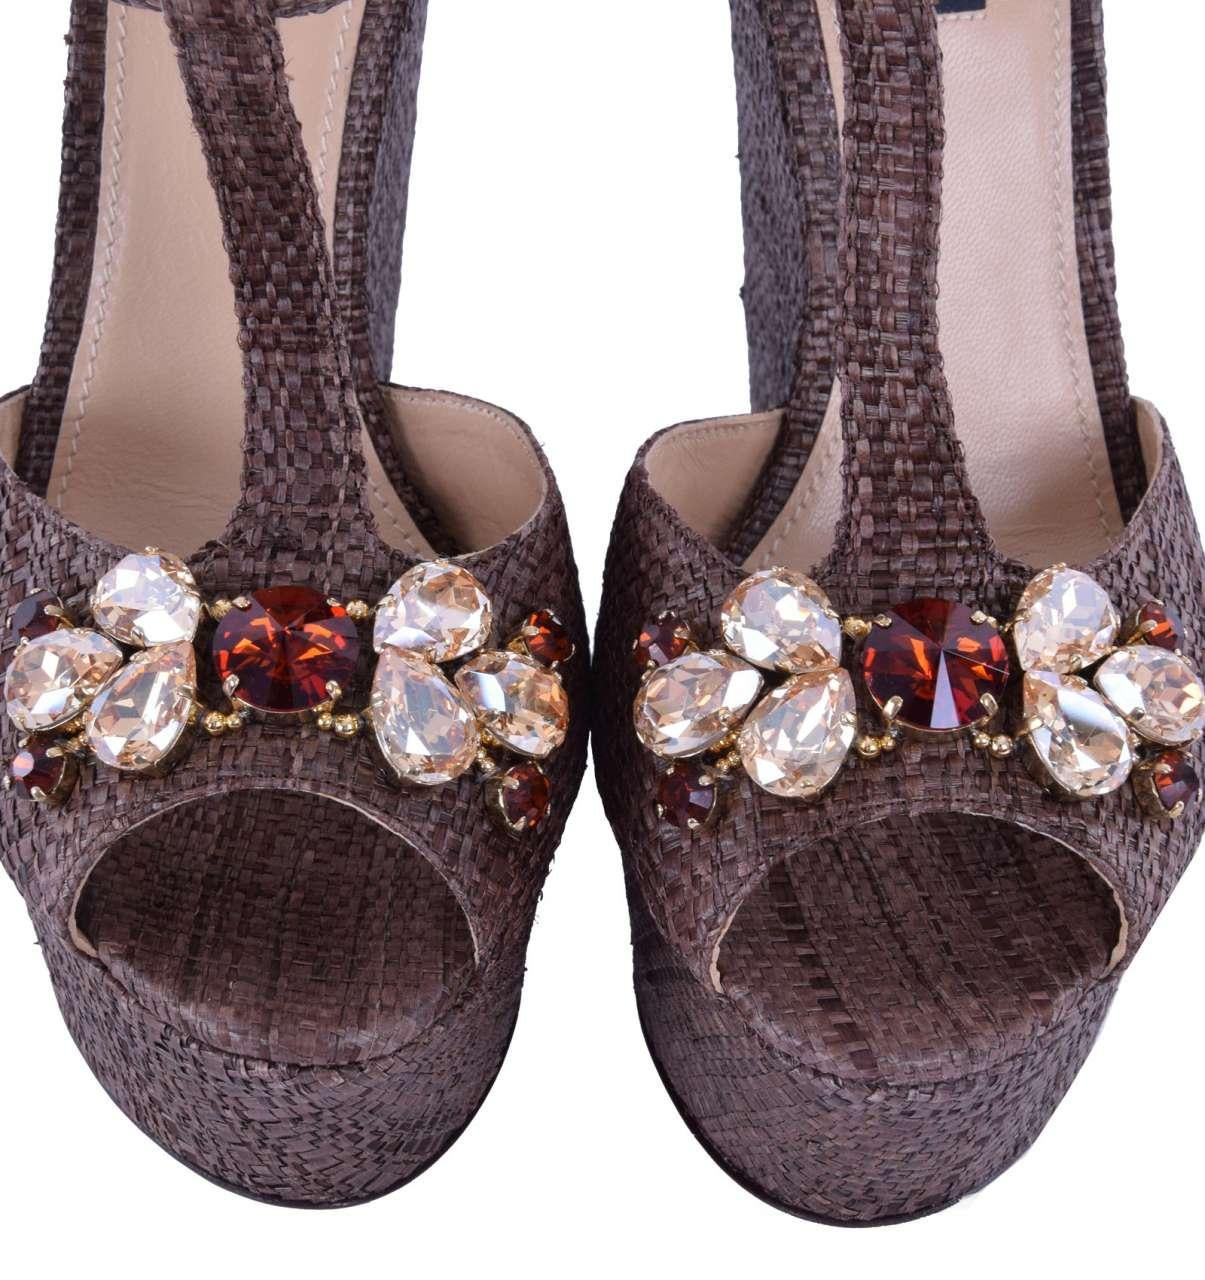 - Crystal embellished textile sandals BIANCA by DOLCE & GABBANA Black Label - MADE IN ITALY - Former RRP: EUR 575 - New with Box - Material: 49% Rafia, 49% Cotton, 2% Goatskin - Wooden wedge - Strass and studs - Sole: Leather - Color: Brown - Model: